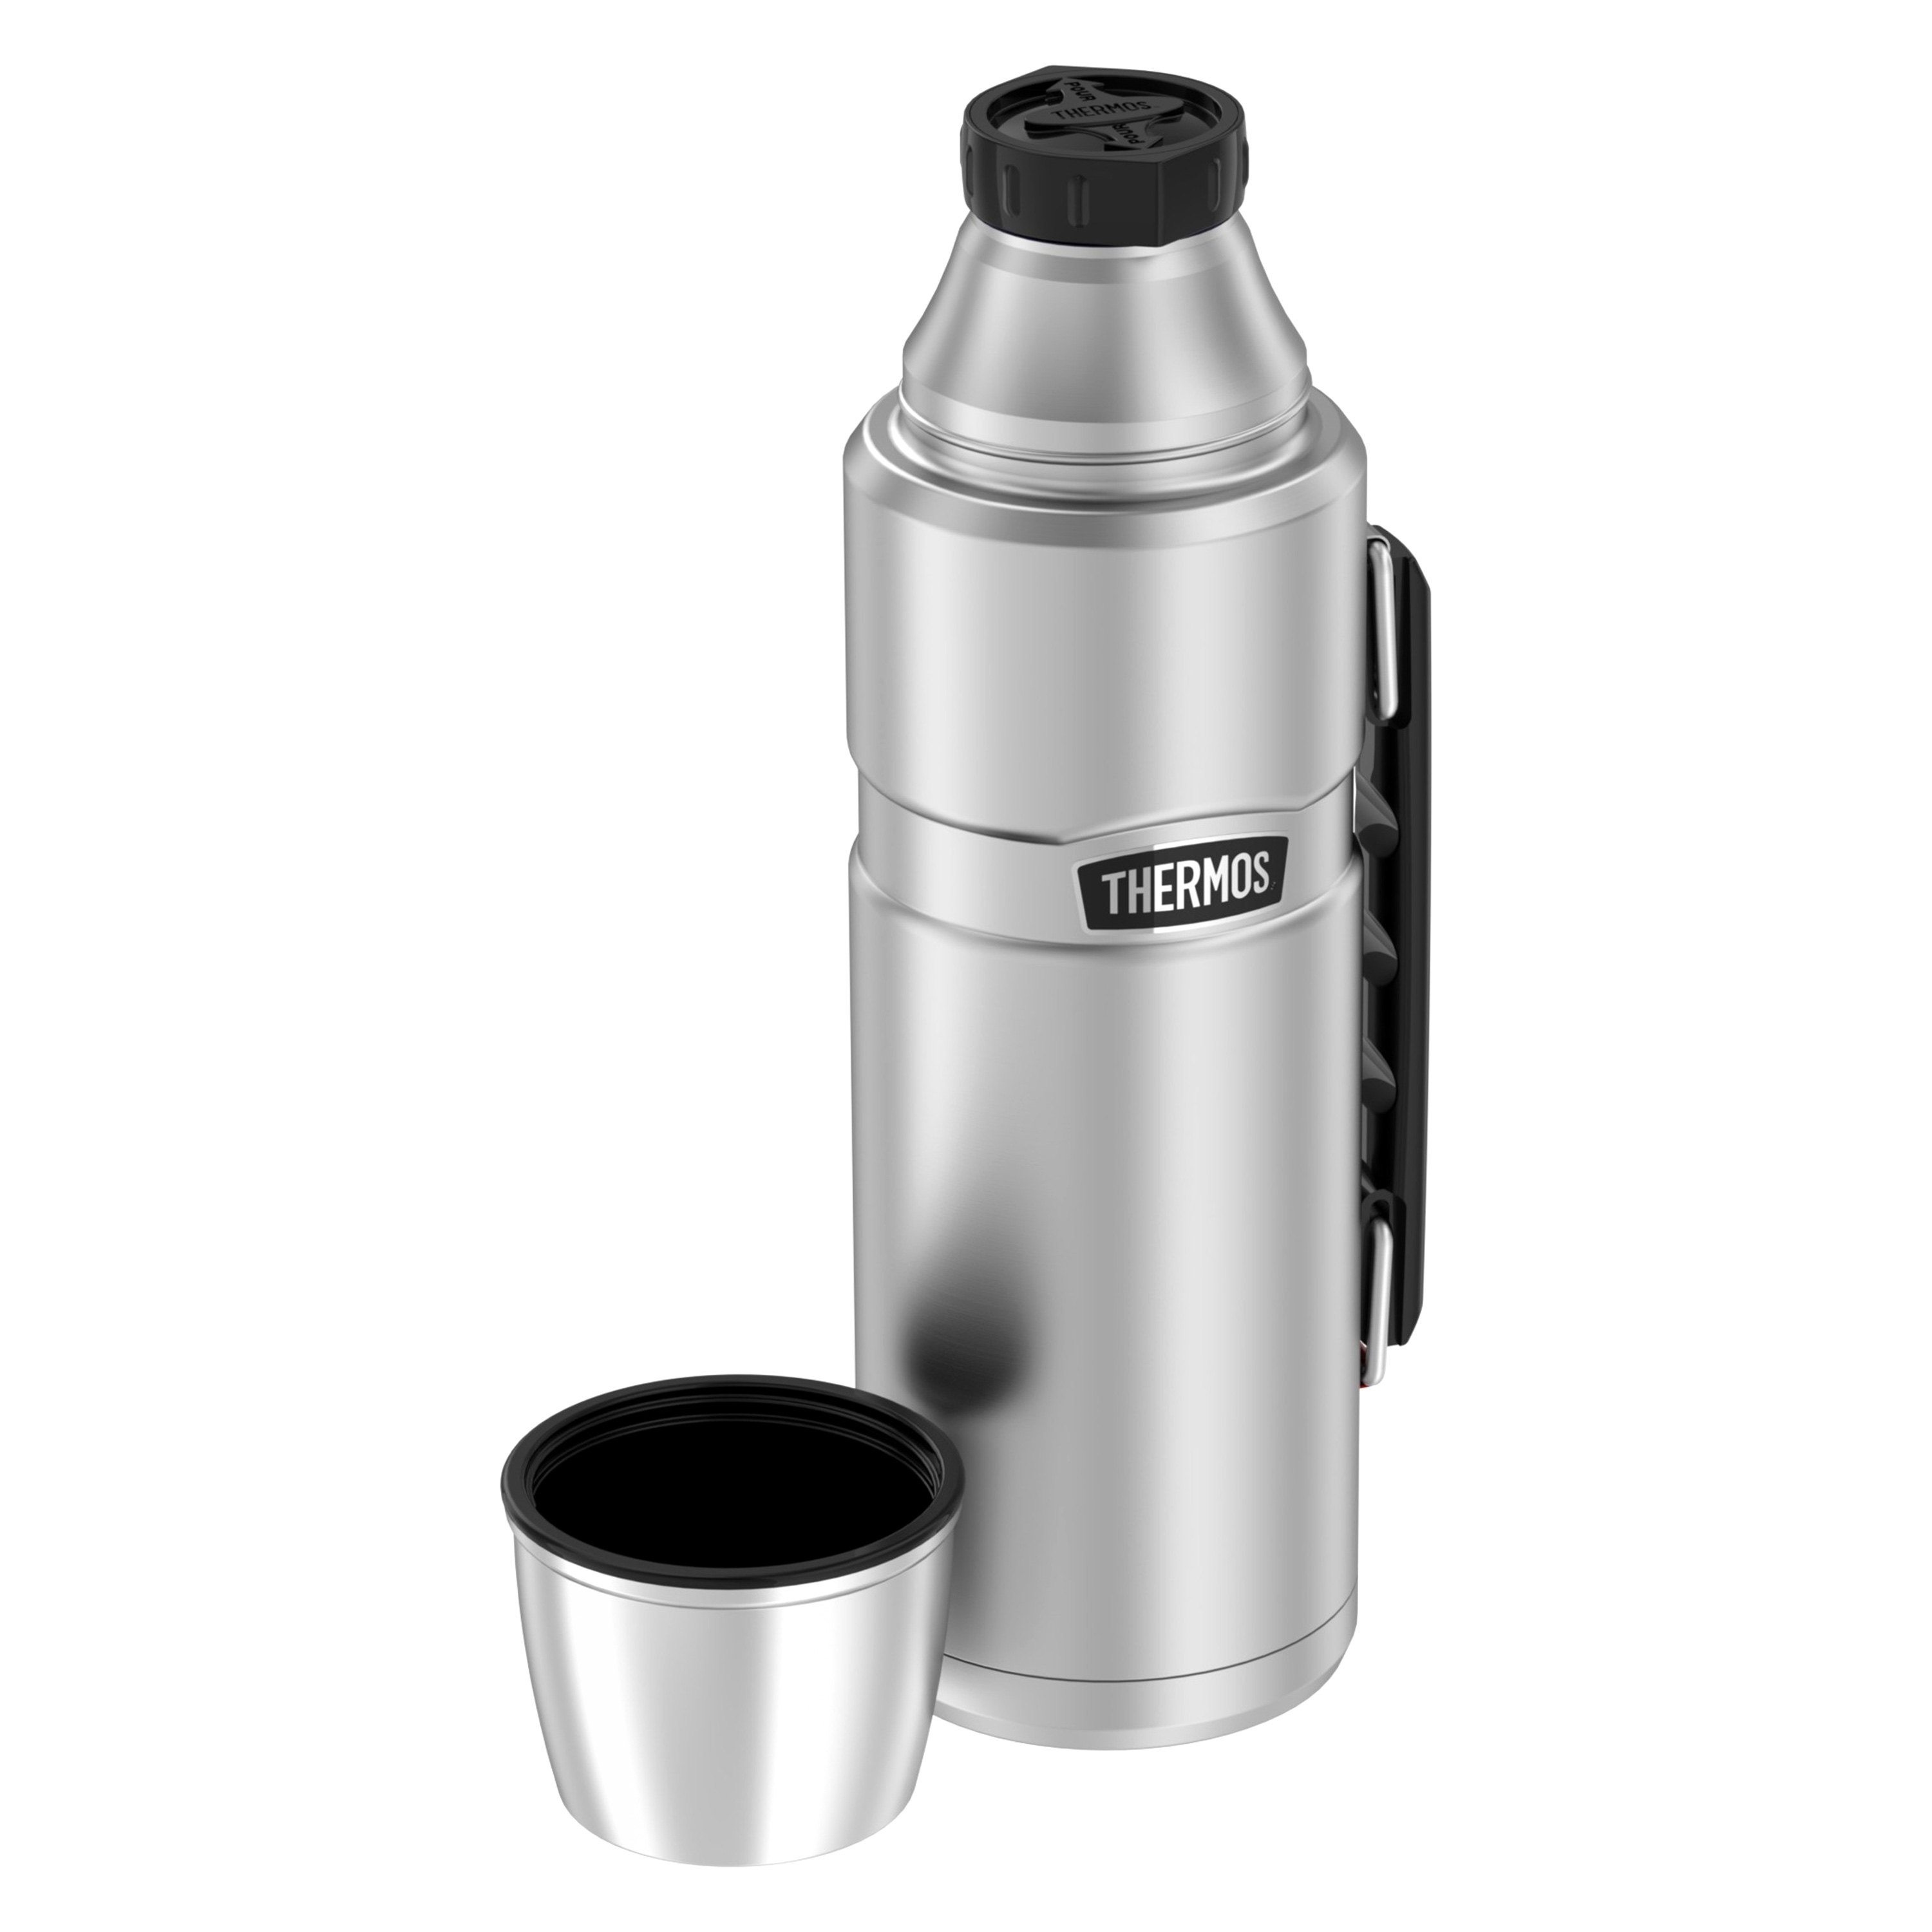 https://images.recreationid.com/thermos/items/sk2020mstri4-4.jpg